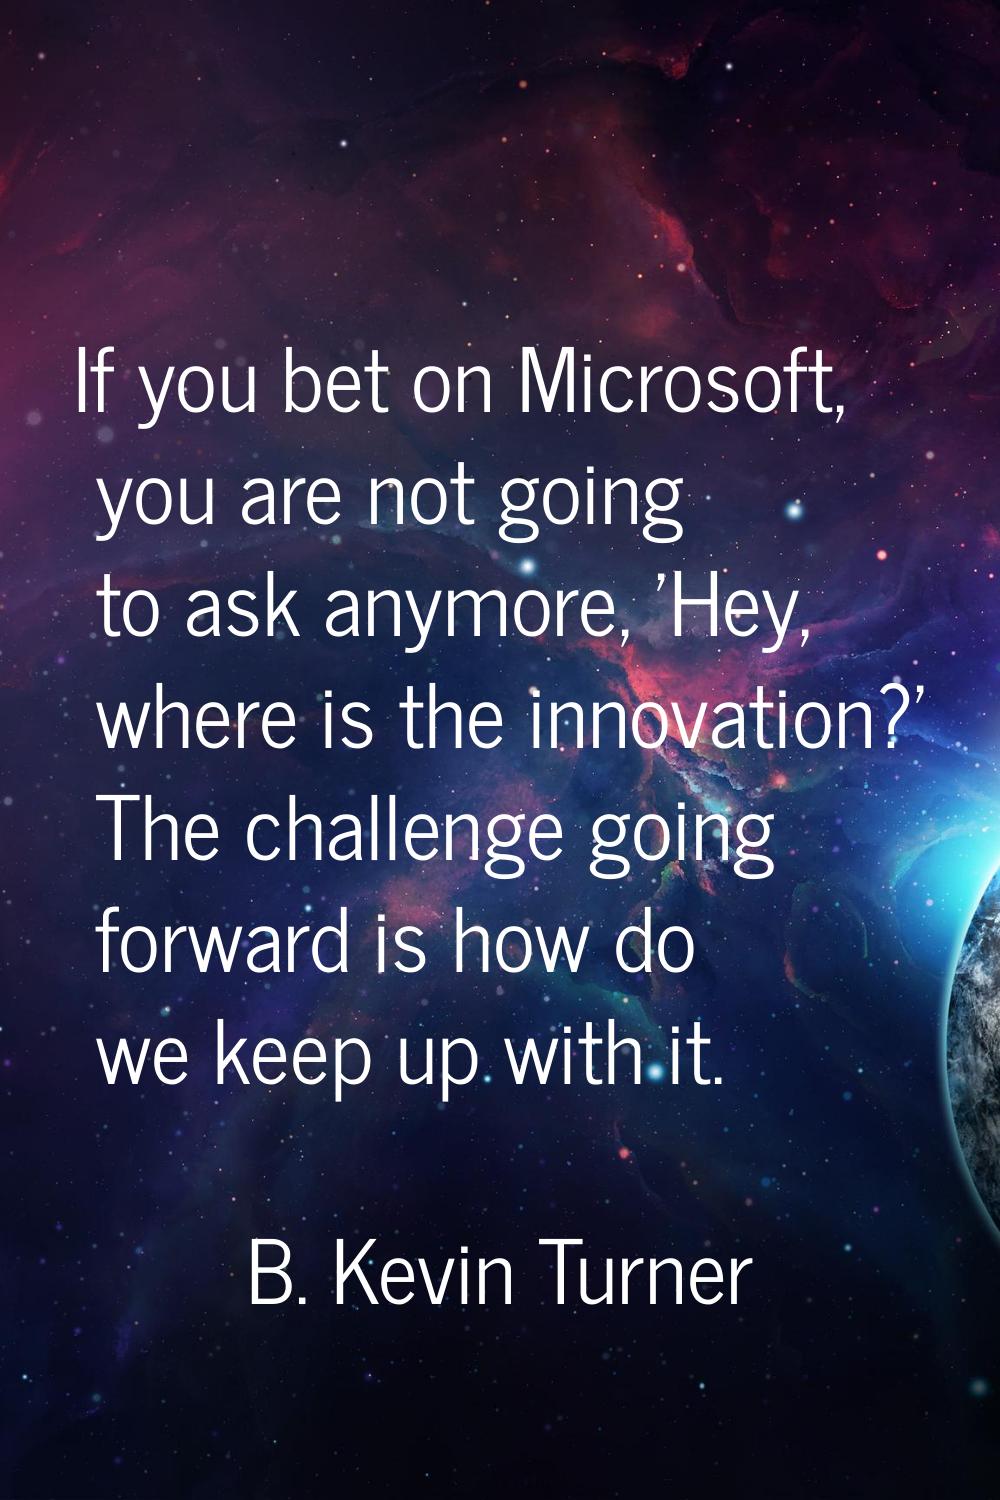 If you bet on Microsoft, you are not going to ask anymore, 'Hey, where is the innovation?' The chal